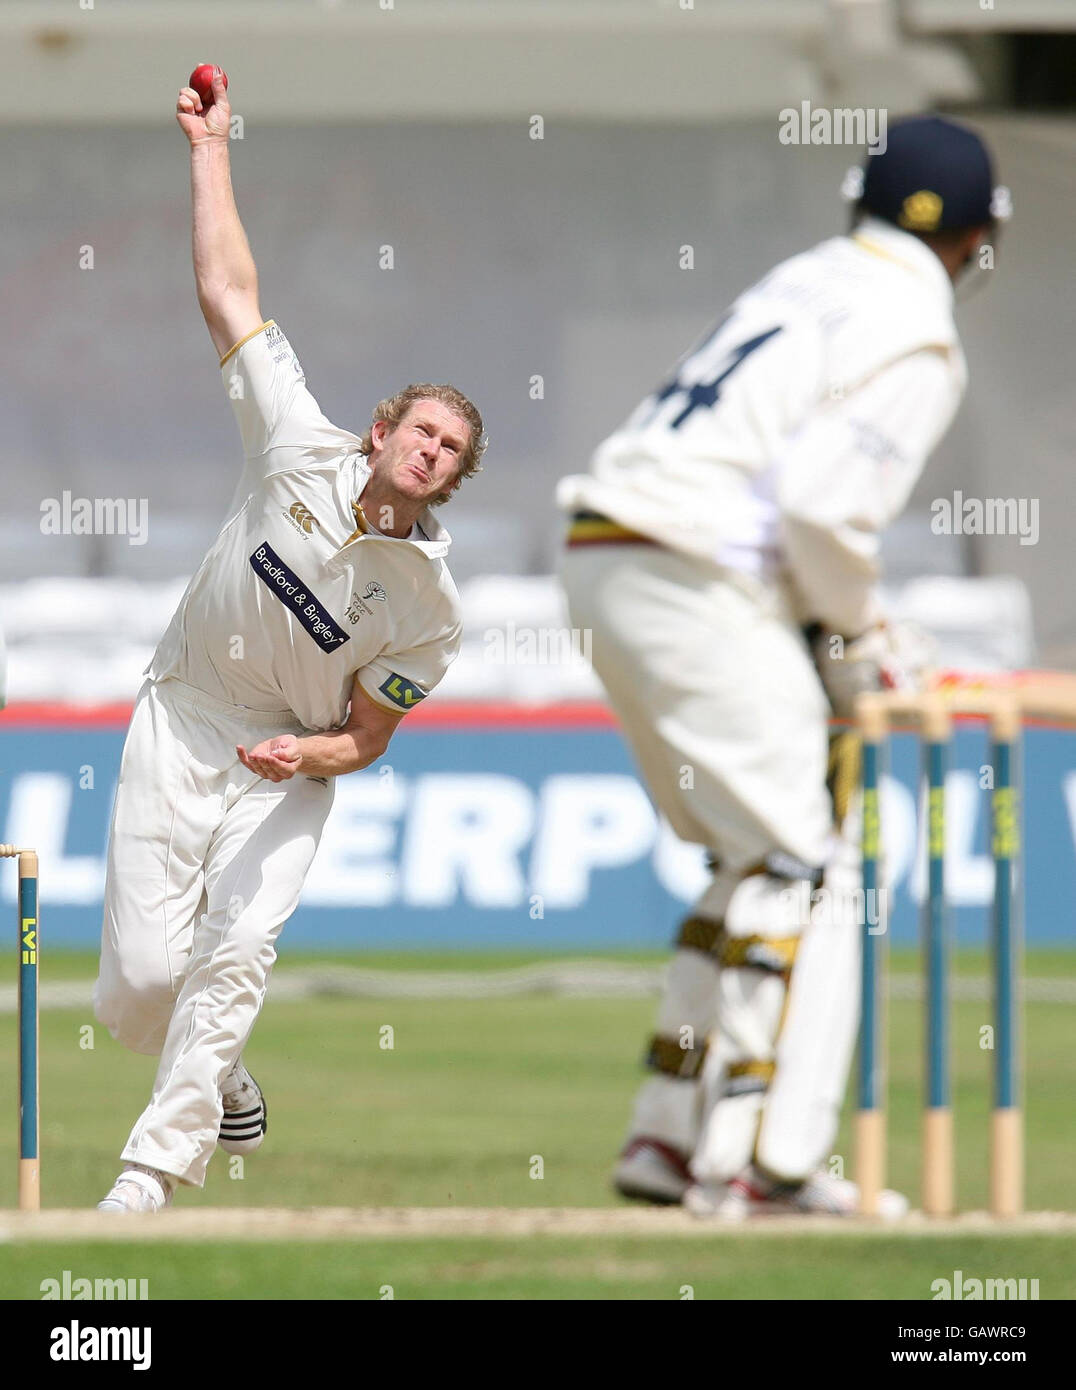 Yorkshire's Matthew Hoggard bowls to Durham's Dale Bekenstein during the LV County Championship, Division One match at Headingley Carnegie, Leeds. Stock Photo